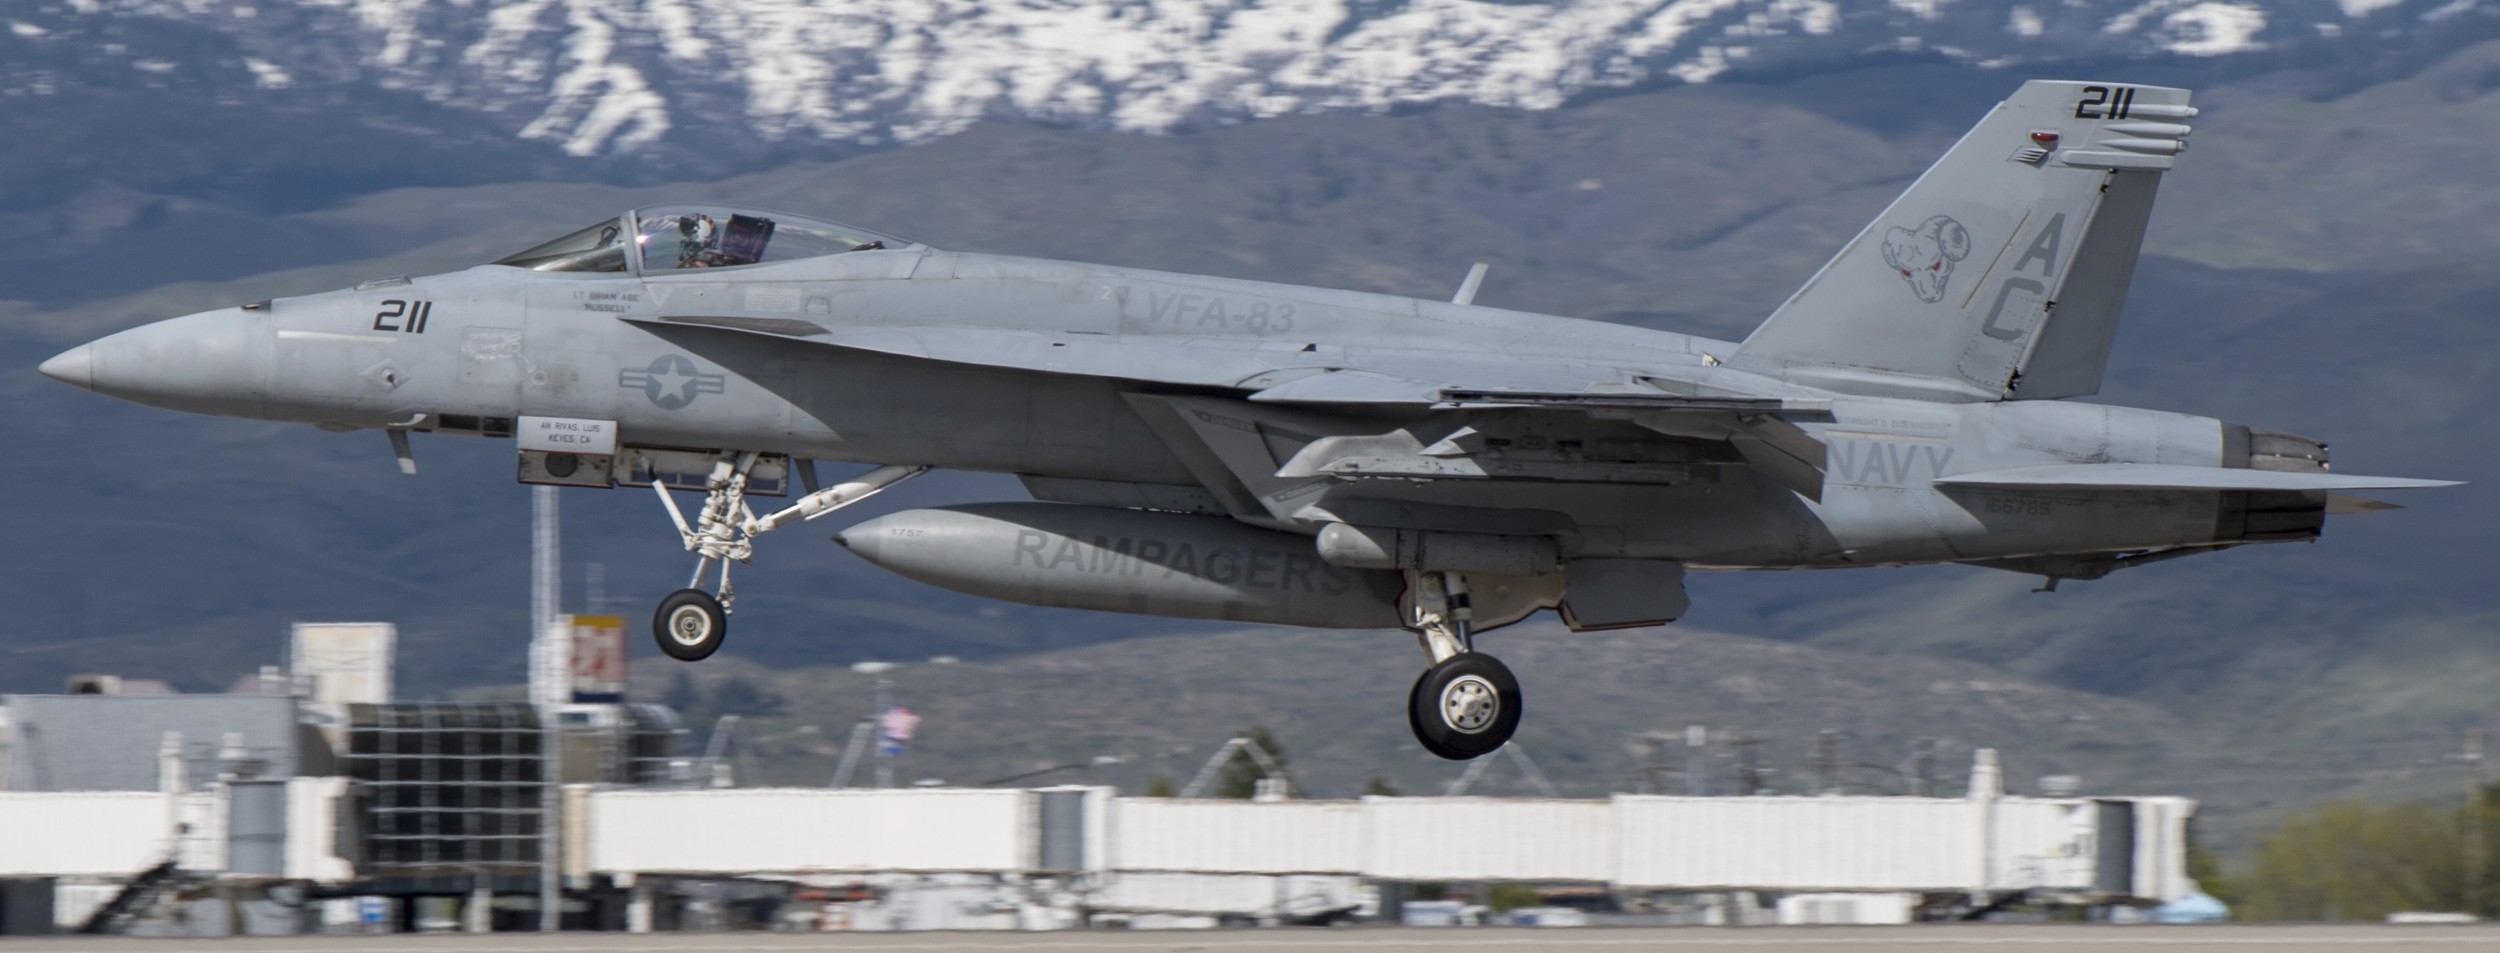 vfa-83 rampagers strike fighter squadron f/a-18e super hornet us navy gowen field angb boise idaho 51